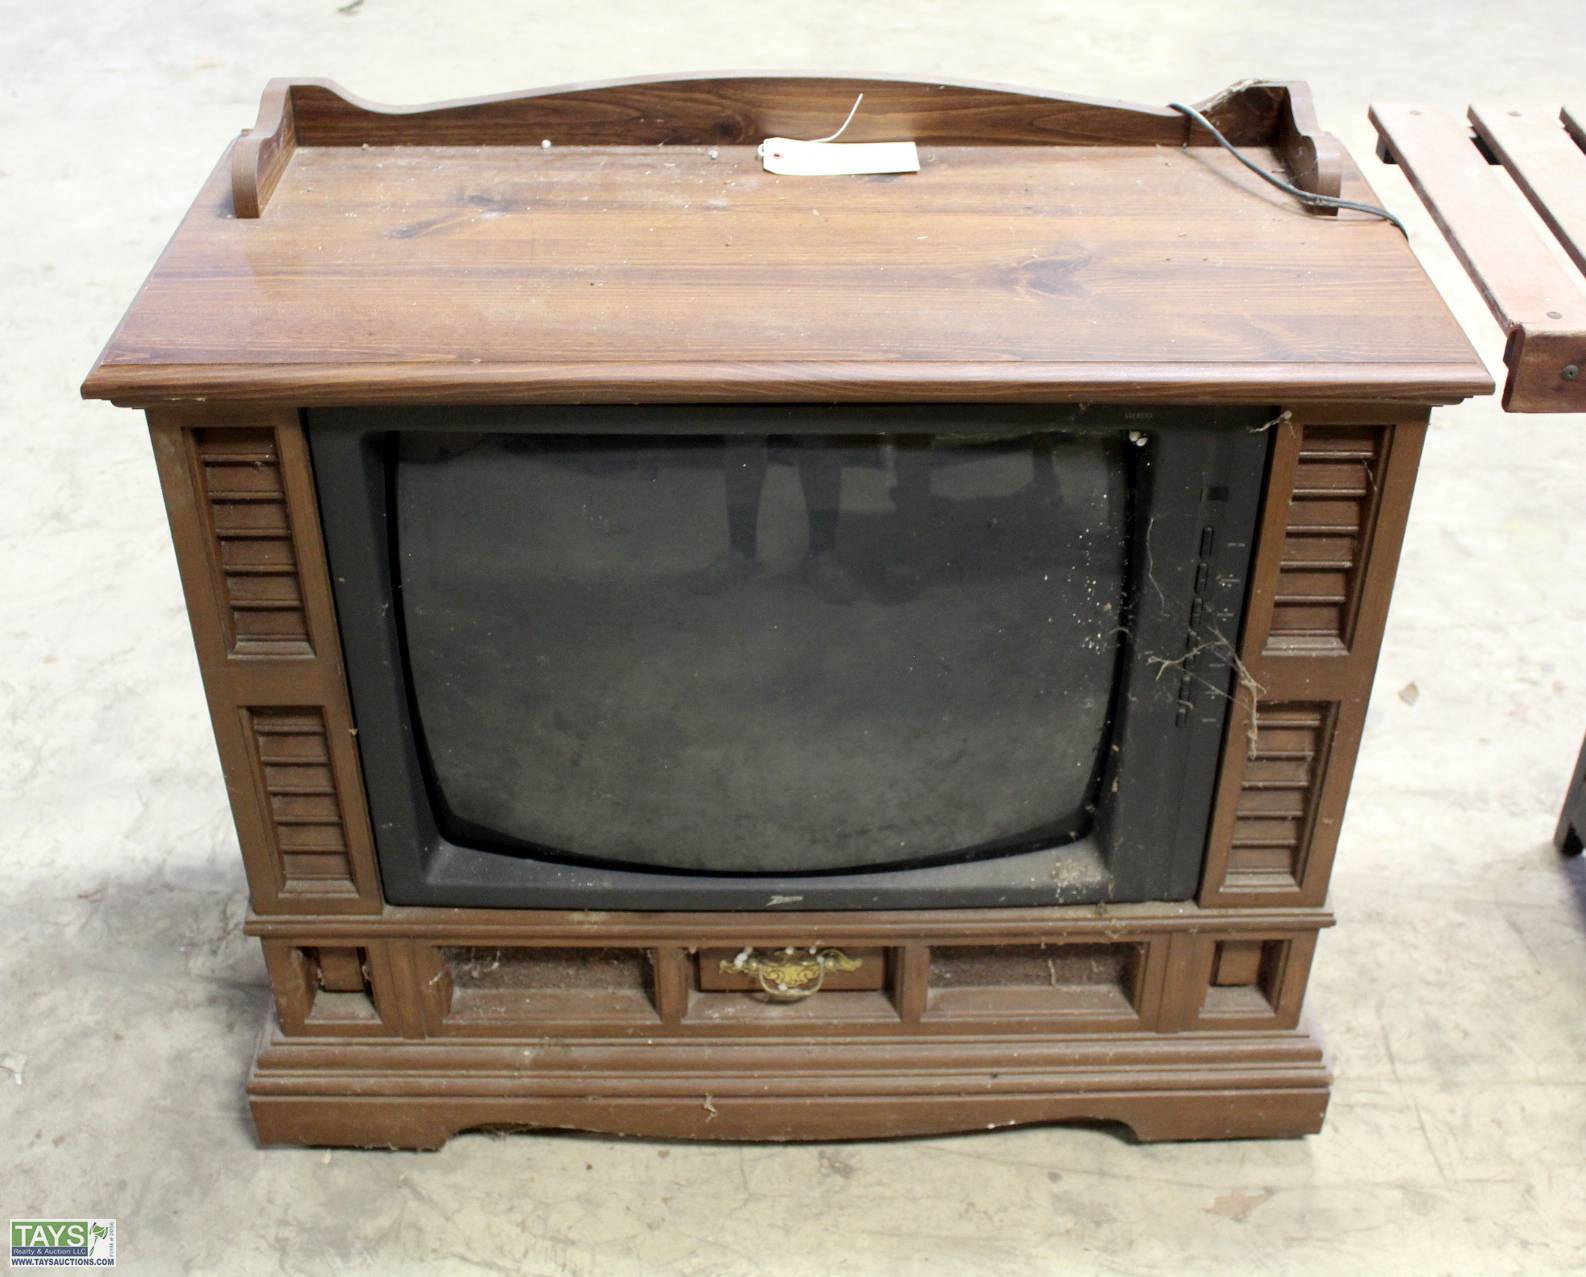 Tays Realty & Auction - Auction: ONLINE ABSOLUTE AUCTION: FURNITURE -  GLASSWARE - ANTIQUES ITEM: Wood Box Zenith Color Sentry Zoom Space Command  TV